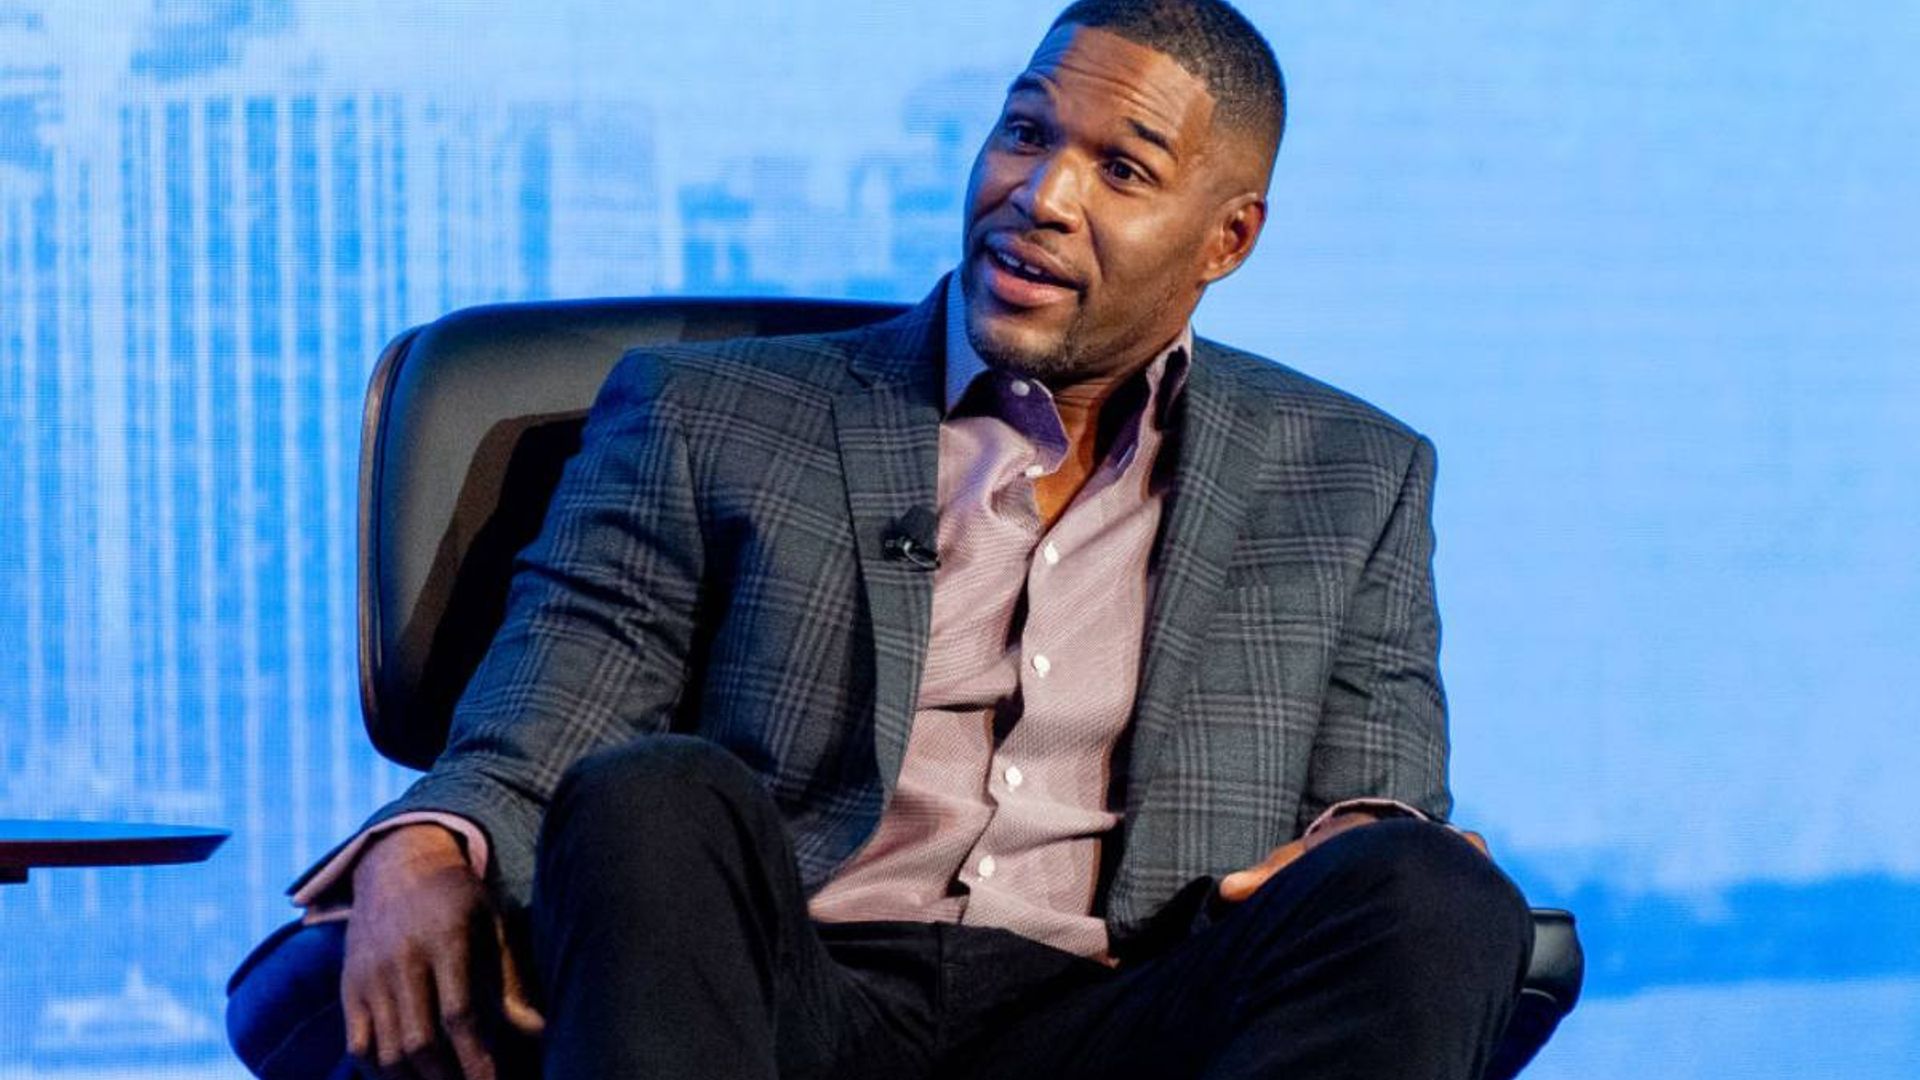 Michael Strahan looks so different in throwback photo which turns heads